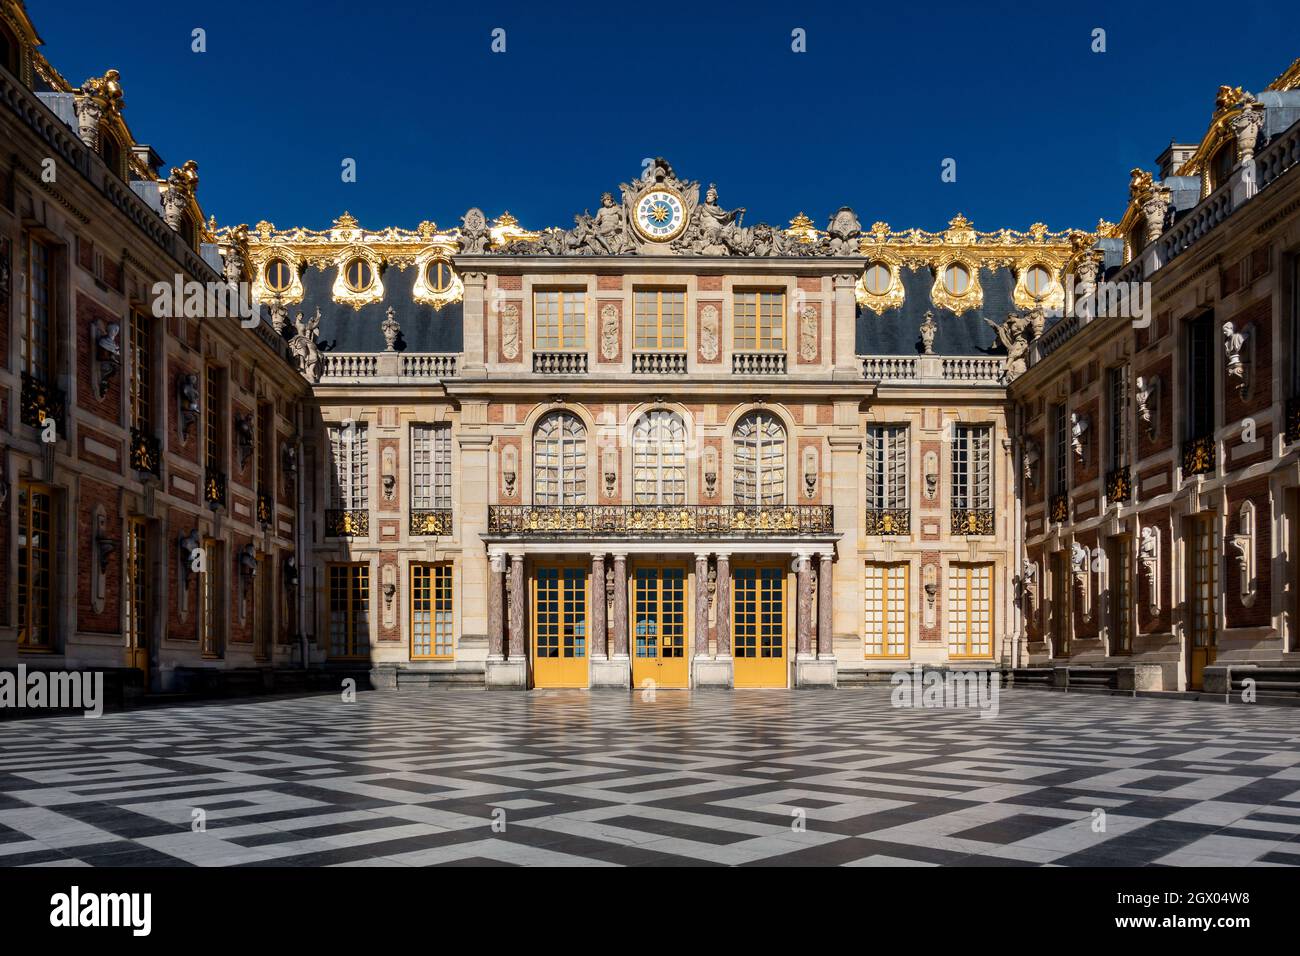 Palace of Versailles in Versailles, France Stock Photo